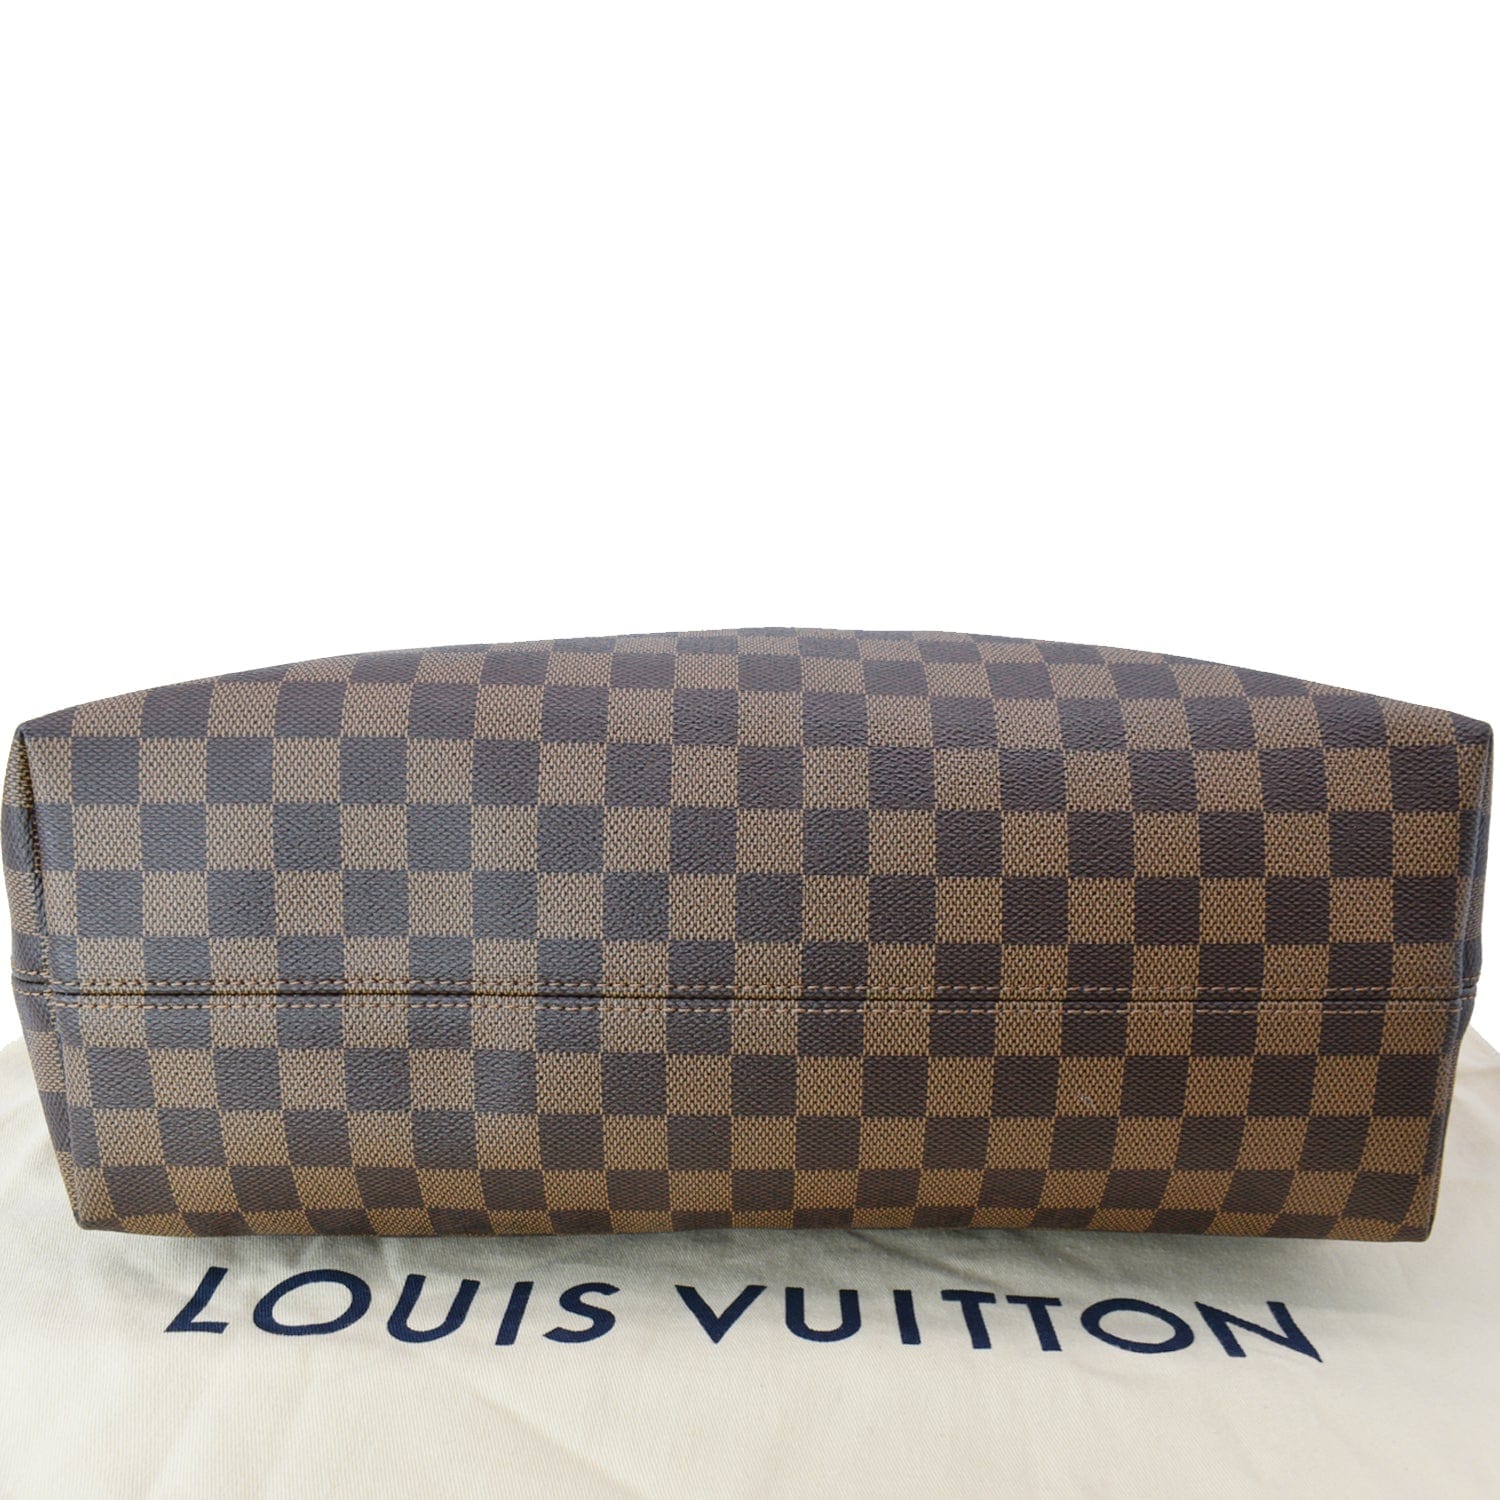 Louis Vuitton Q5D20 for $5,707 for sale from a Trusted Seller on Chrono24